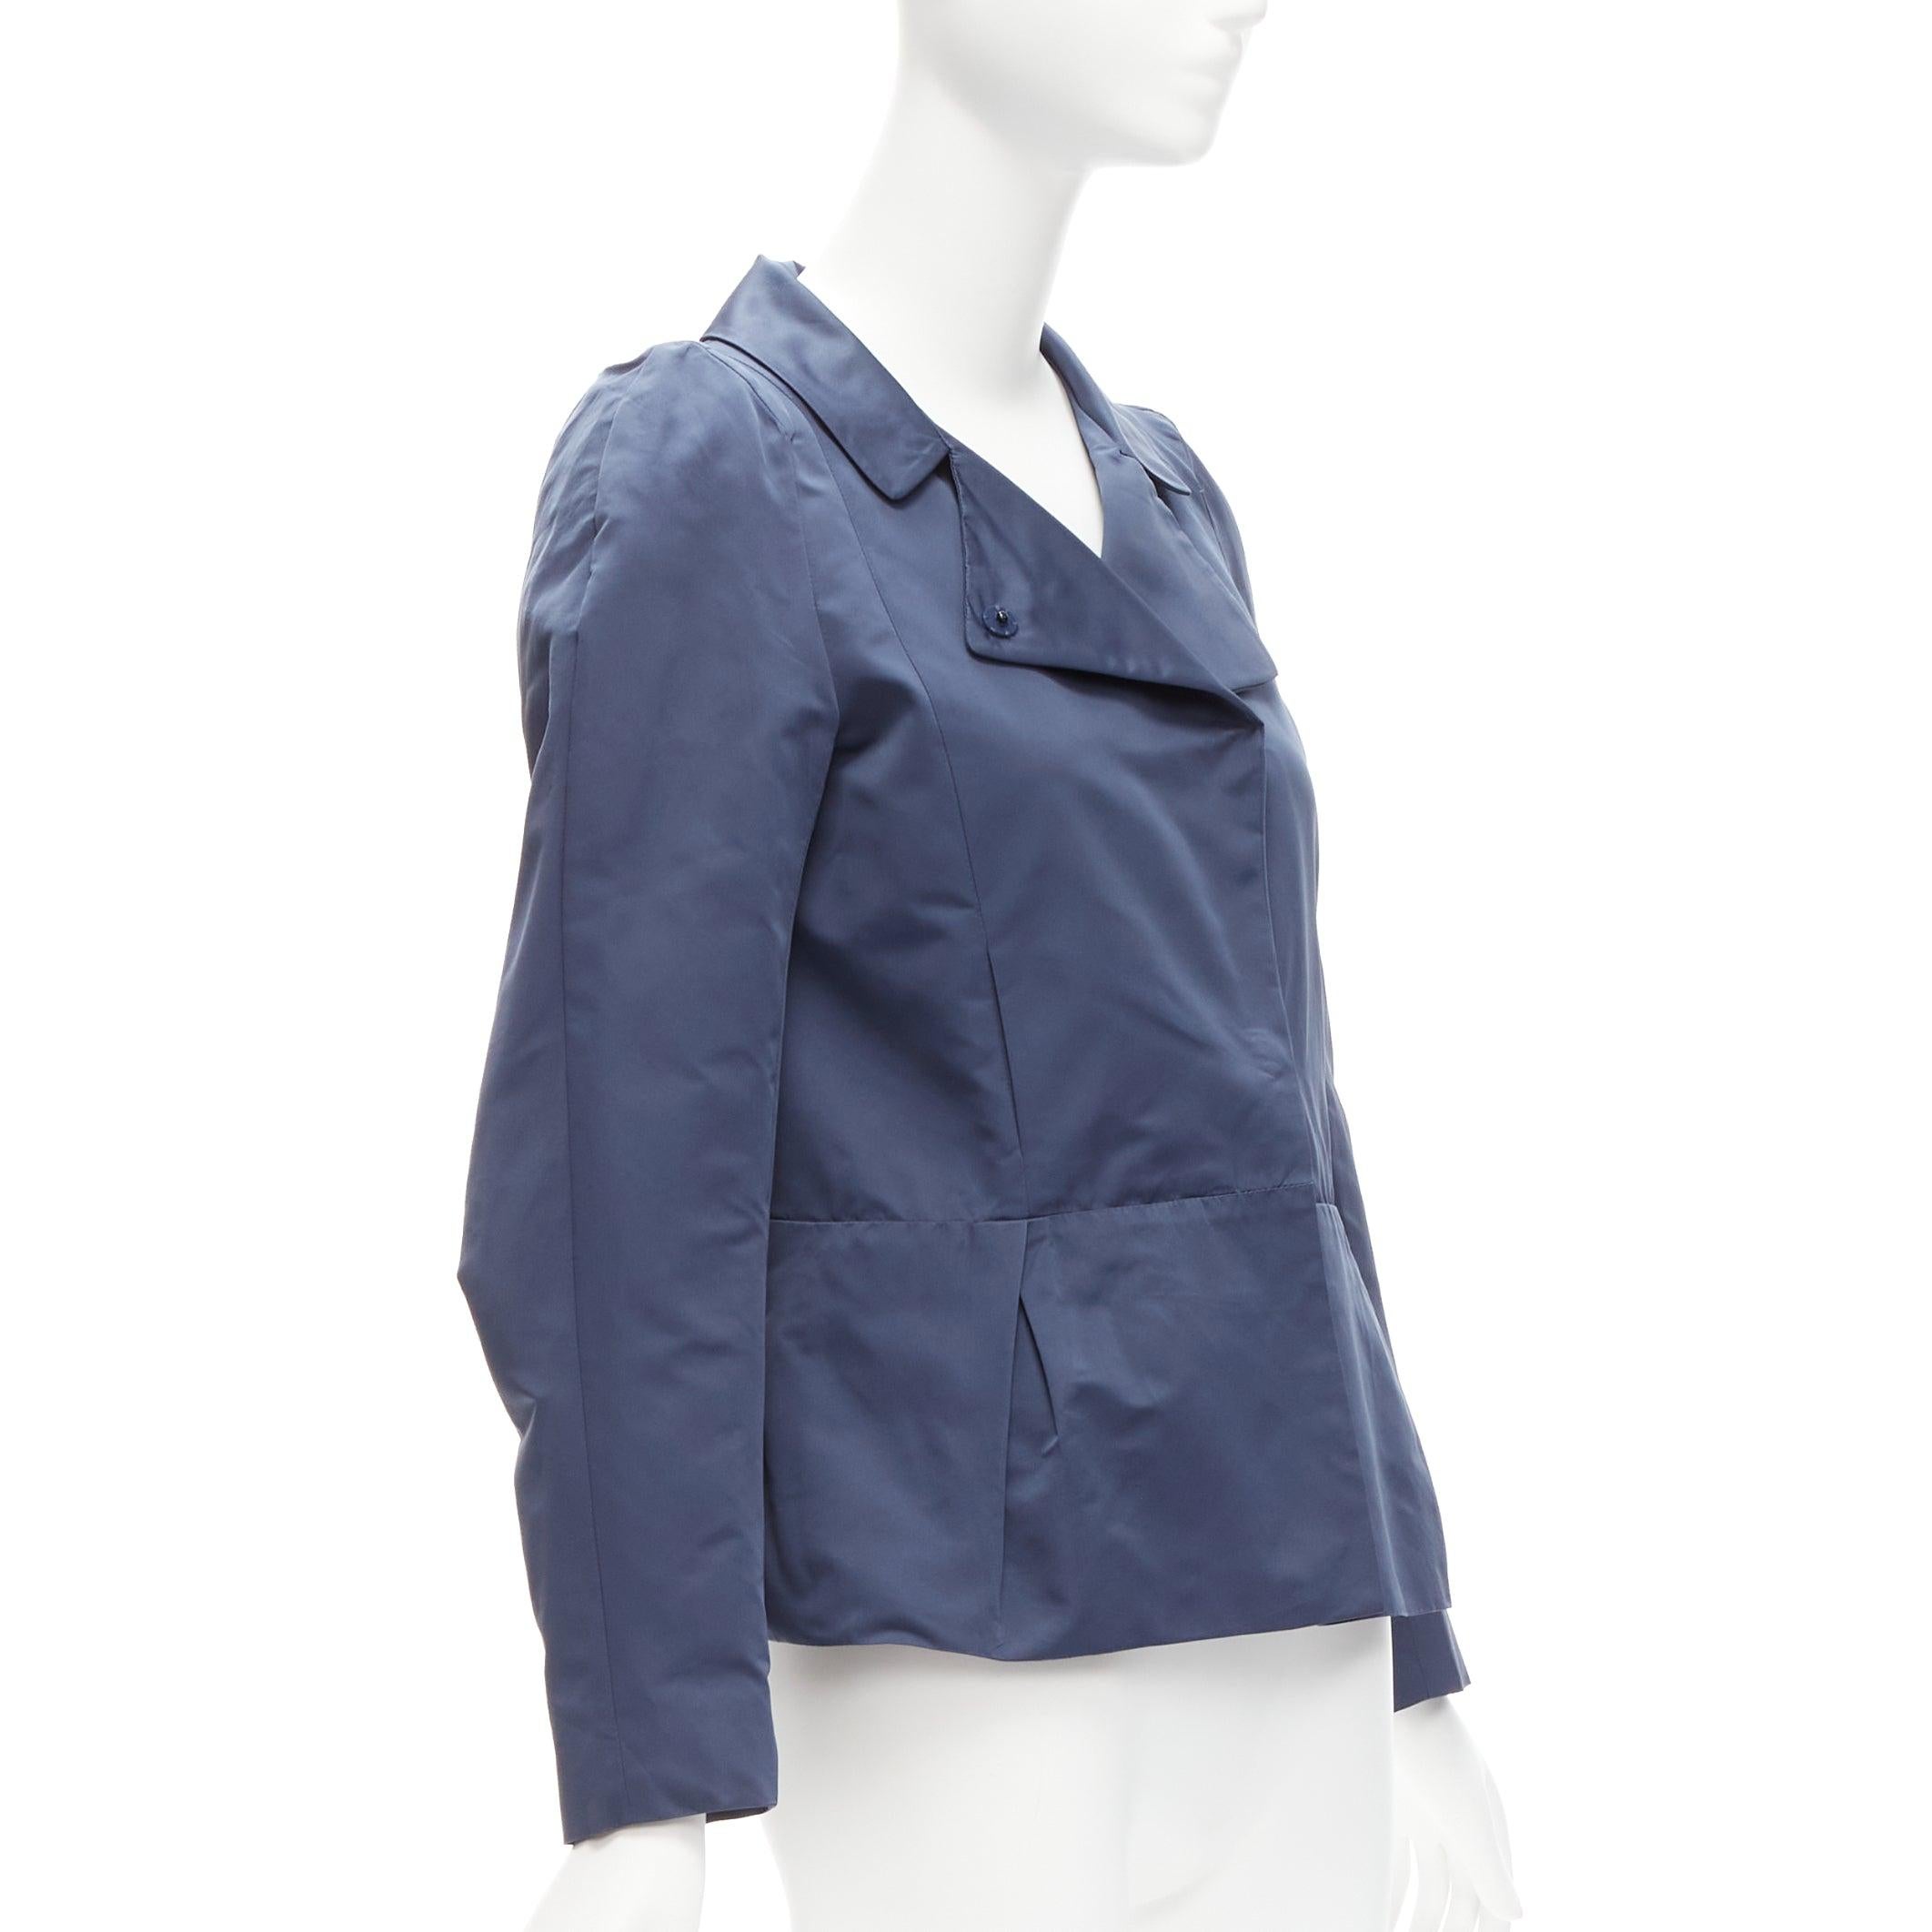 MARNI blue satin structural puff shoulder peplum minimal cropped jacket IT42 M
Reference: CELG/A00235
Brand: Marni
Material: Polyester
Color: Blue
Pattern: Solid
Closure: Snap Buttons
Lining: Navy Fabric
Extra Details: Hidden snap buttons. Lined and